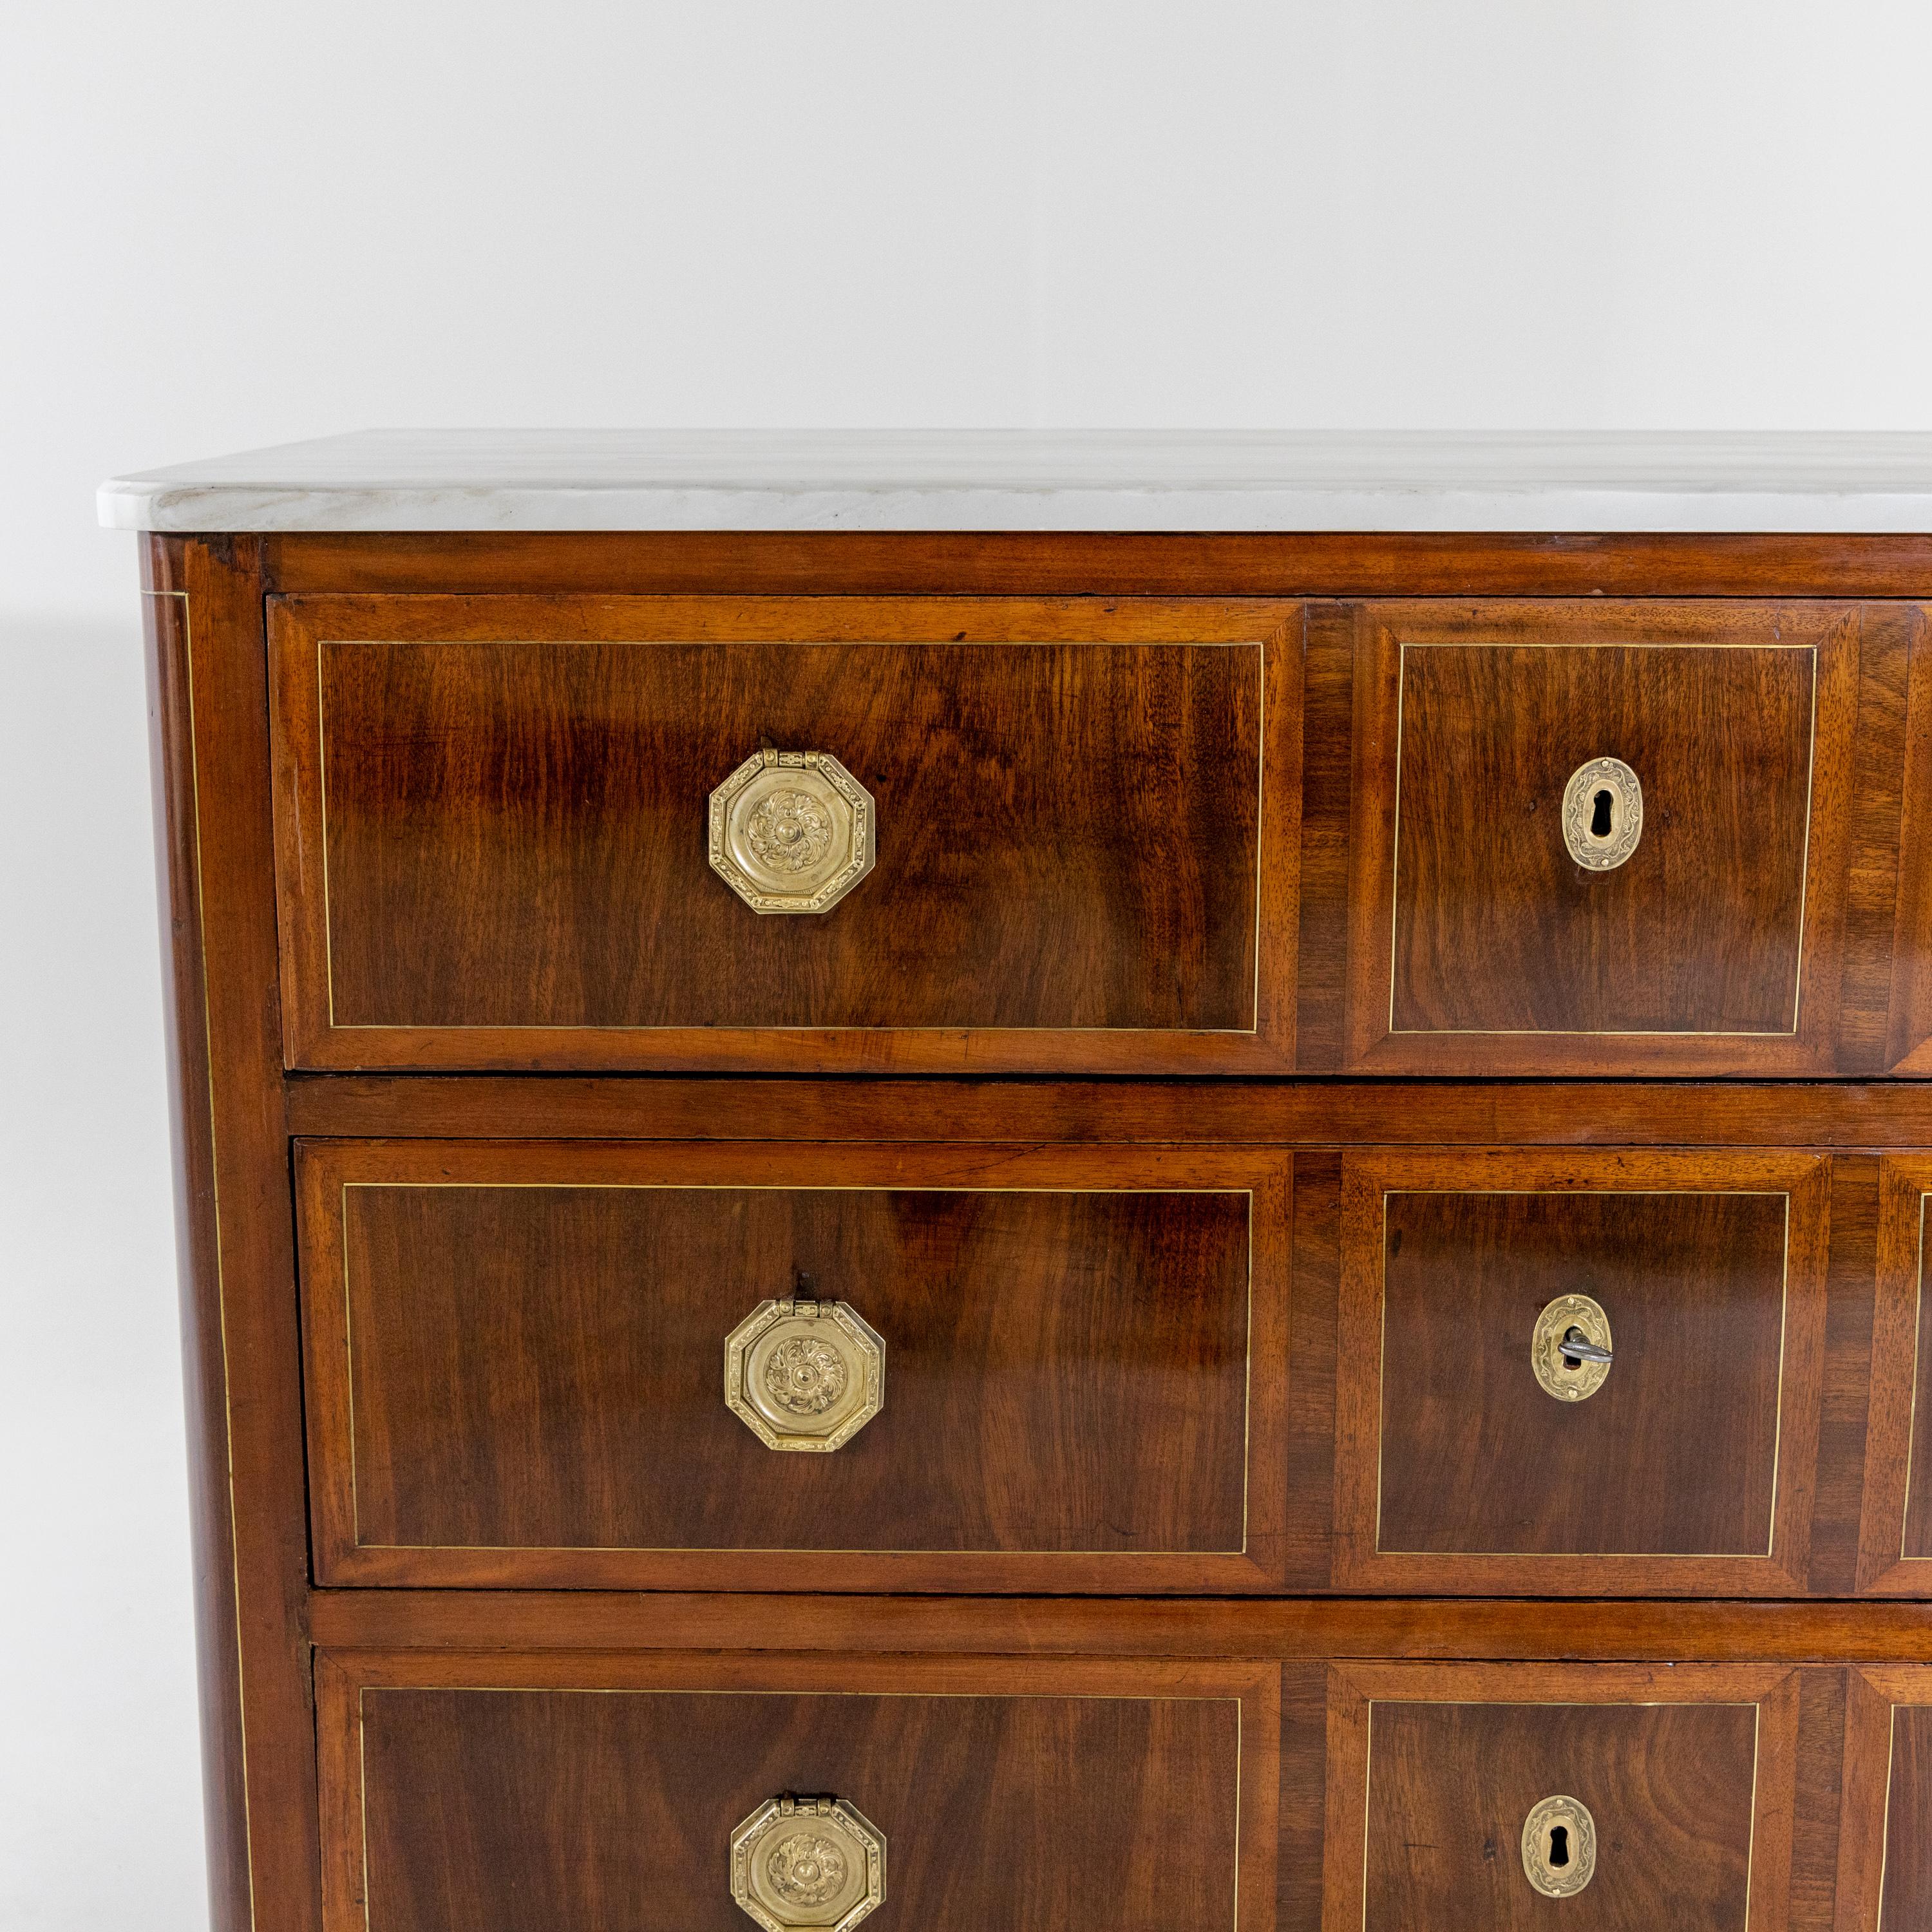 Chest of drawers with three-bay body and framing brass inlays on the sides and front. The top plate made of marble is recent.